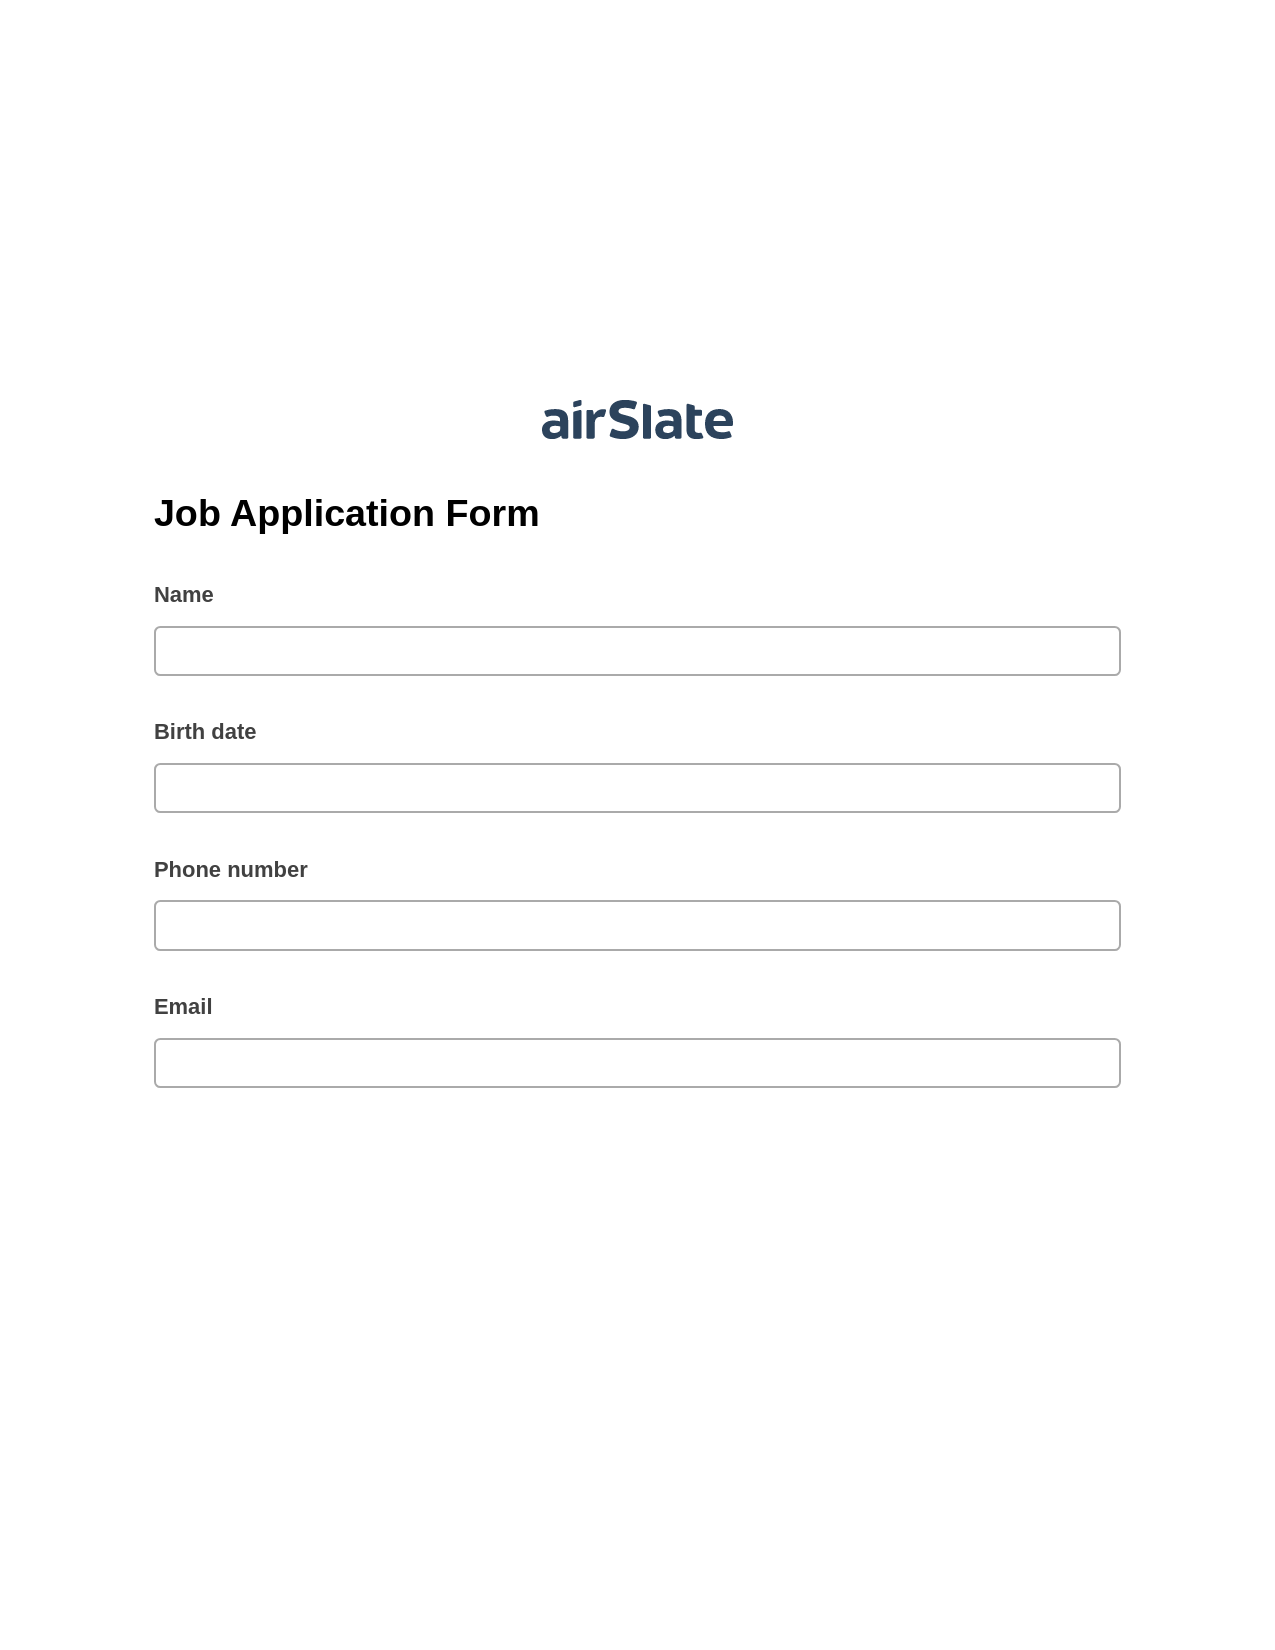 Multirole Job Application Form Pre-fill from Excel Spreadsheet Bot, Create NetSuite Records Bot, Export to Formstack Documents Bot